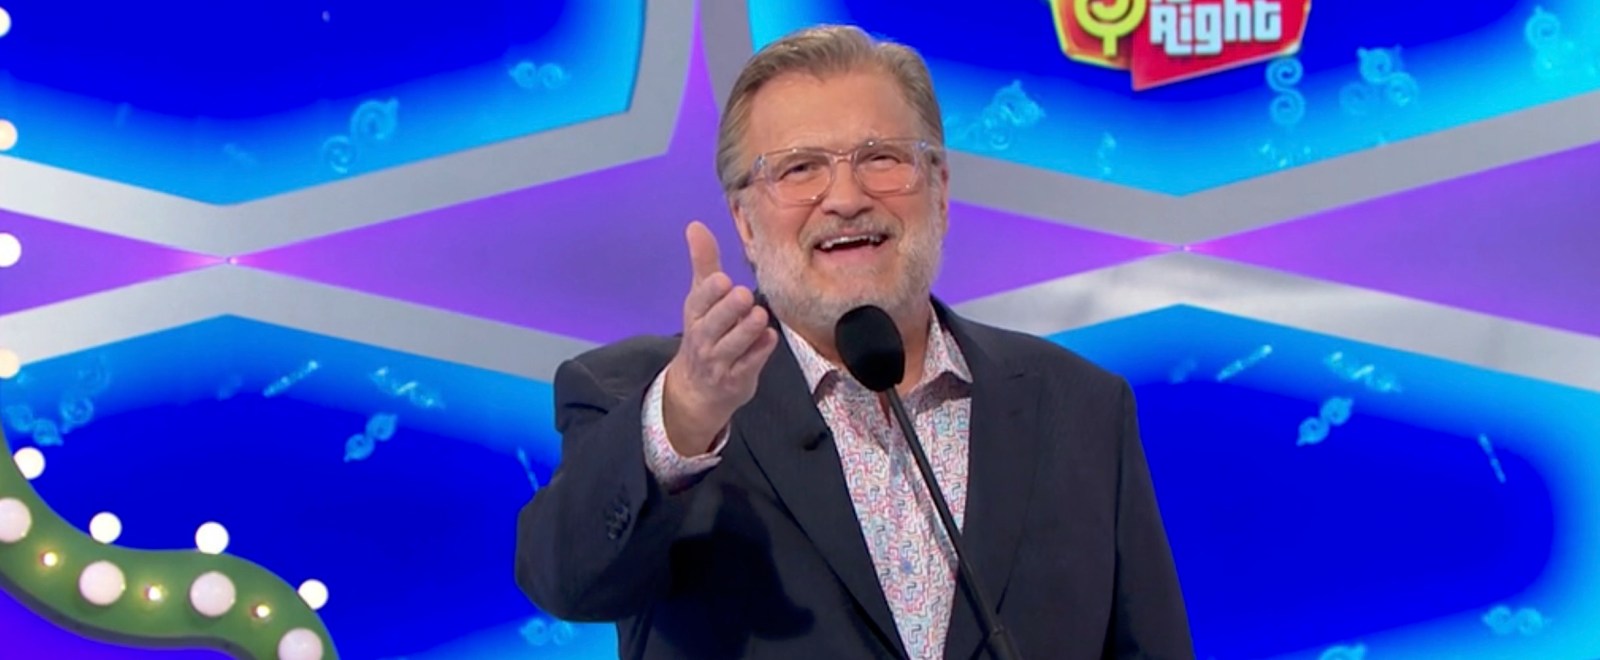 Drew Carey Initially Said ‘F*ck No’ To Hosting ‘The Price Is Right,’ But The Money Was Too Good To Turn Down